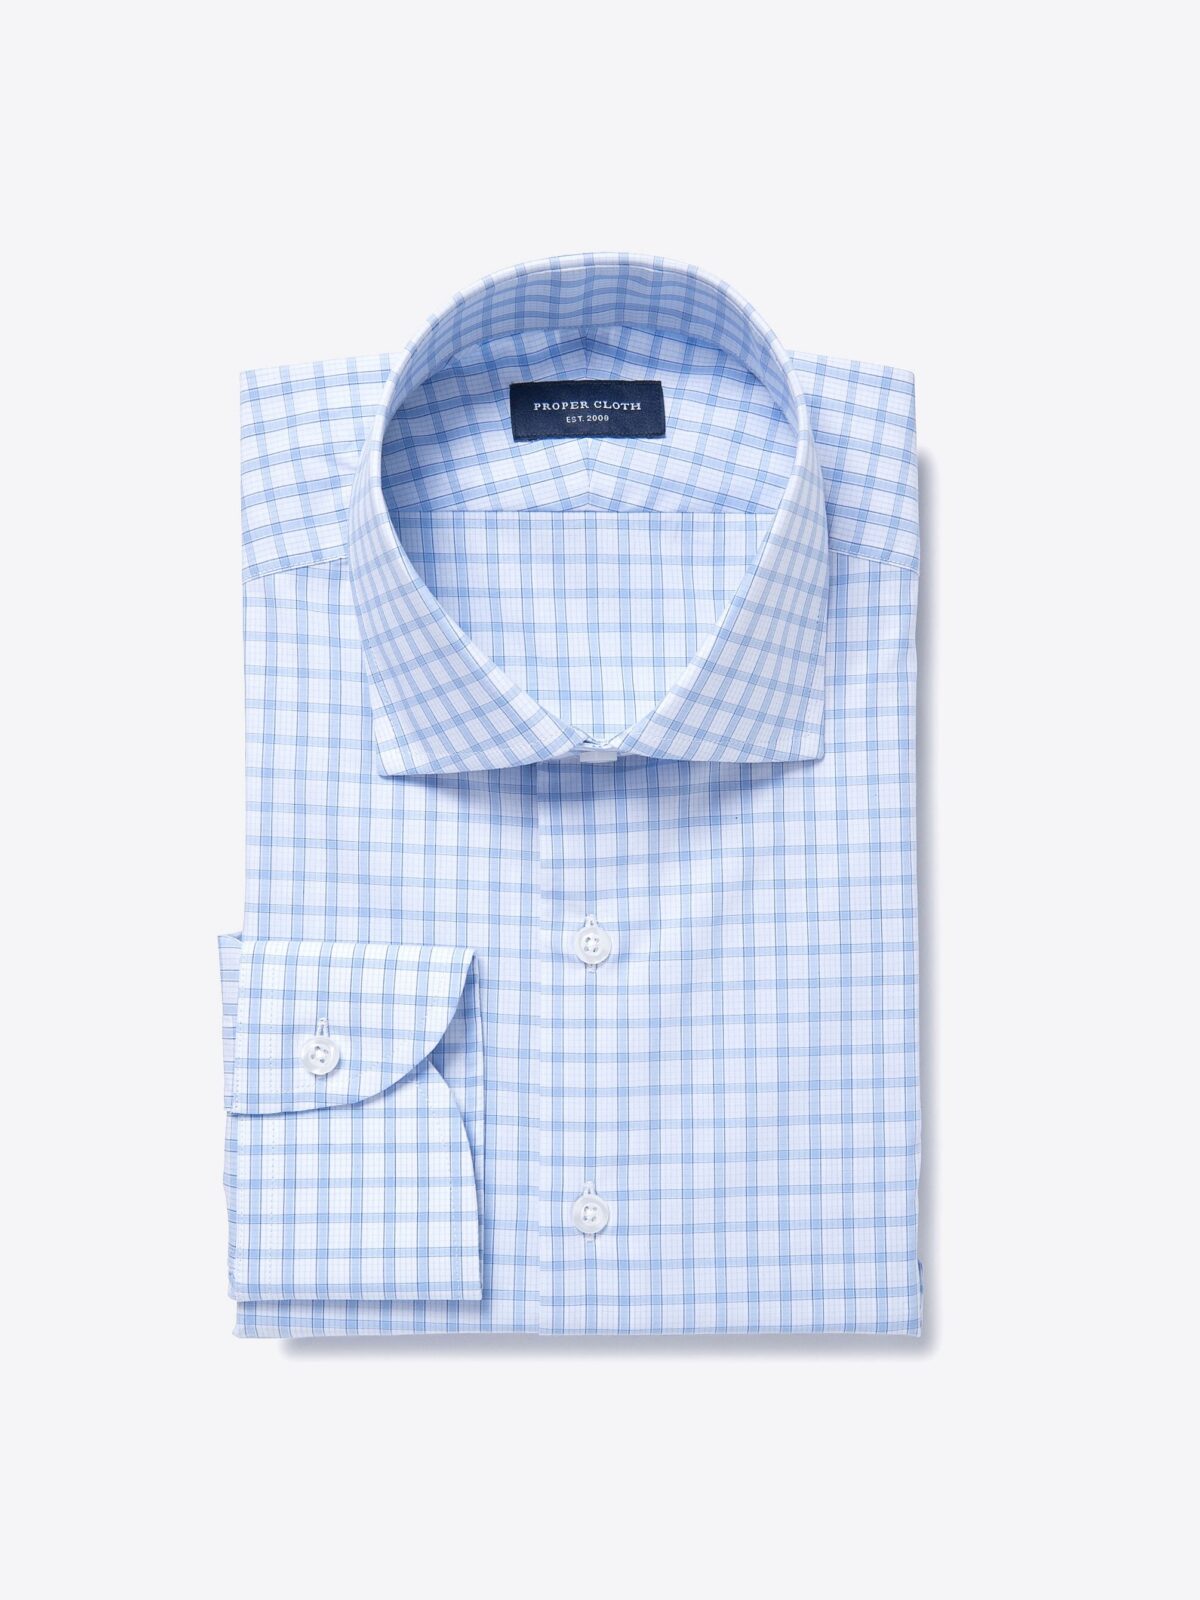 Essex Light Blue Multi Check Fitted Shirt Shirt by Proper Cloth